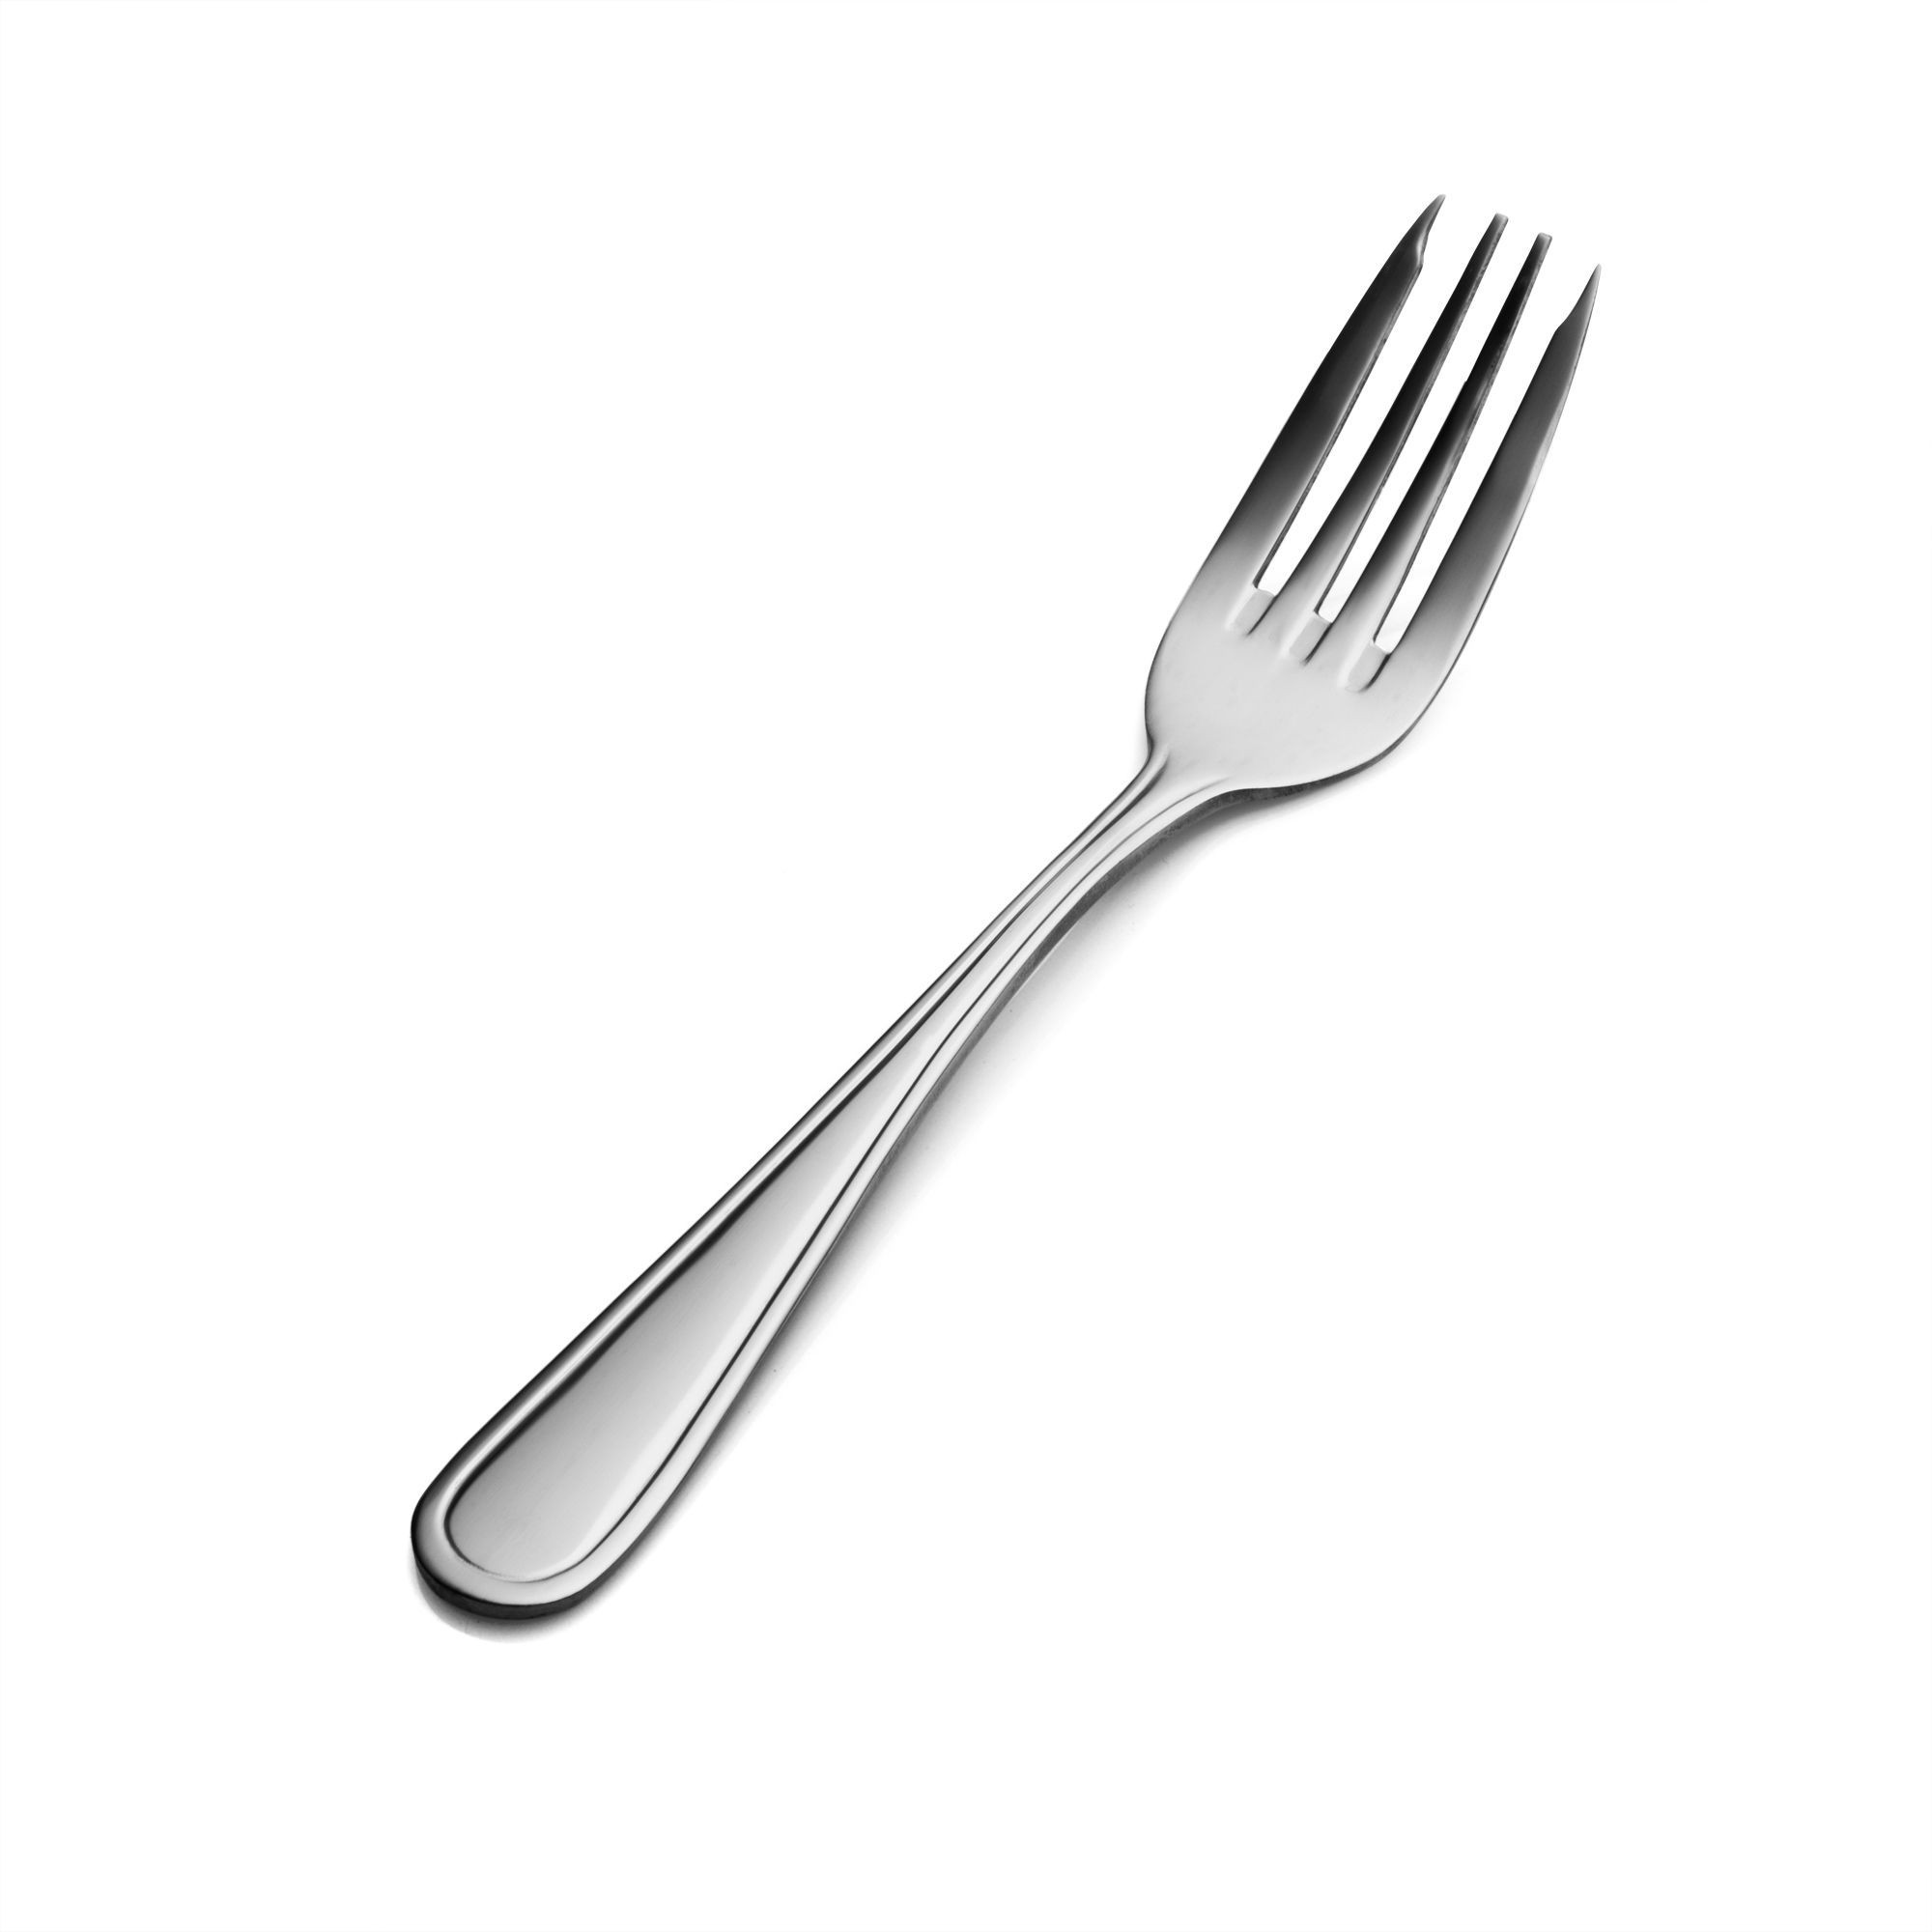 Bon Chef S307S Tuscany 18/8 Stainless Steel Silverplated Salad and Dessert Fork